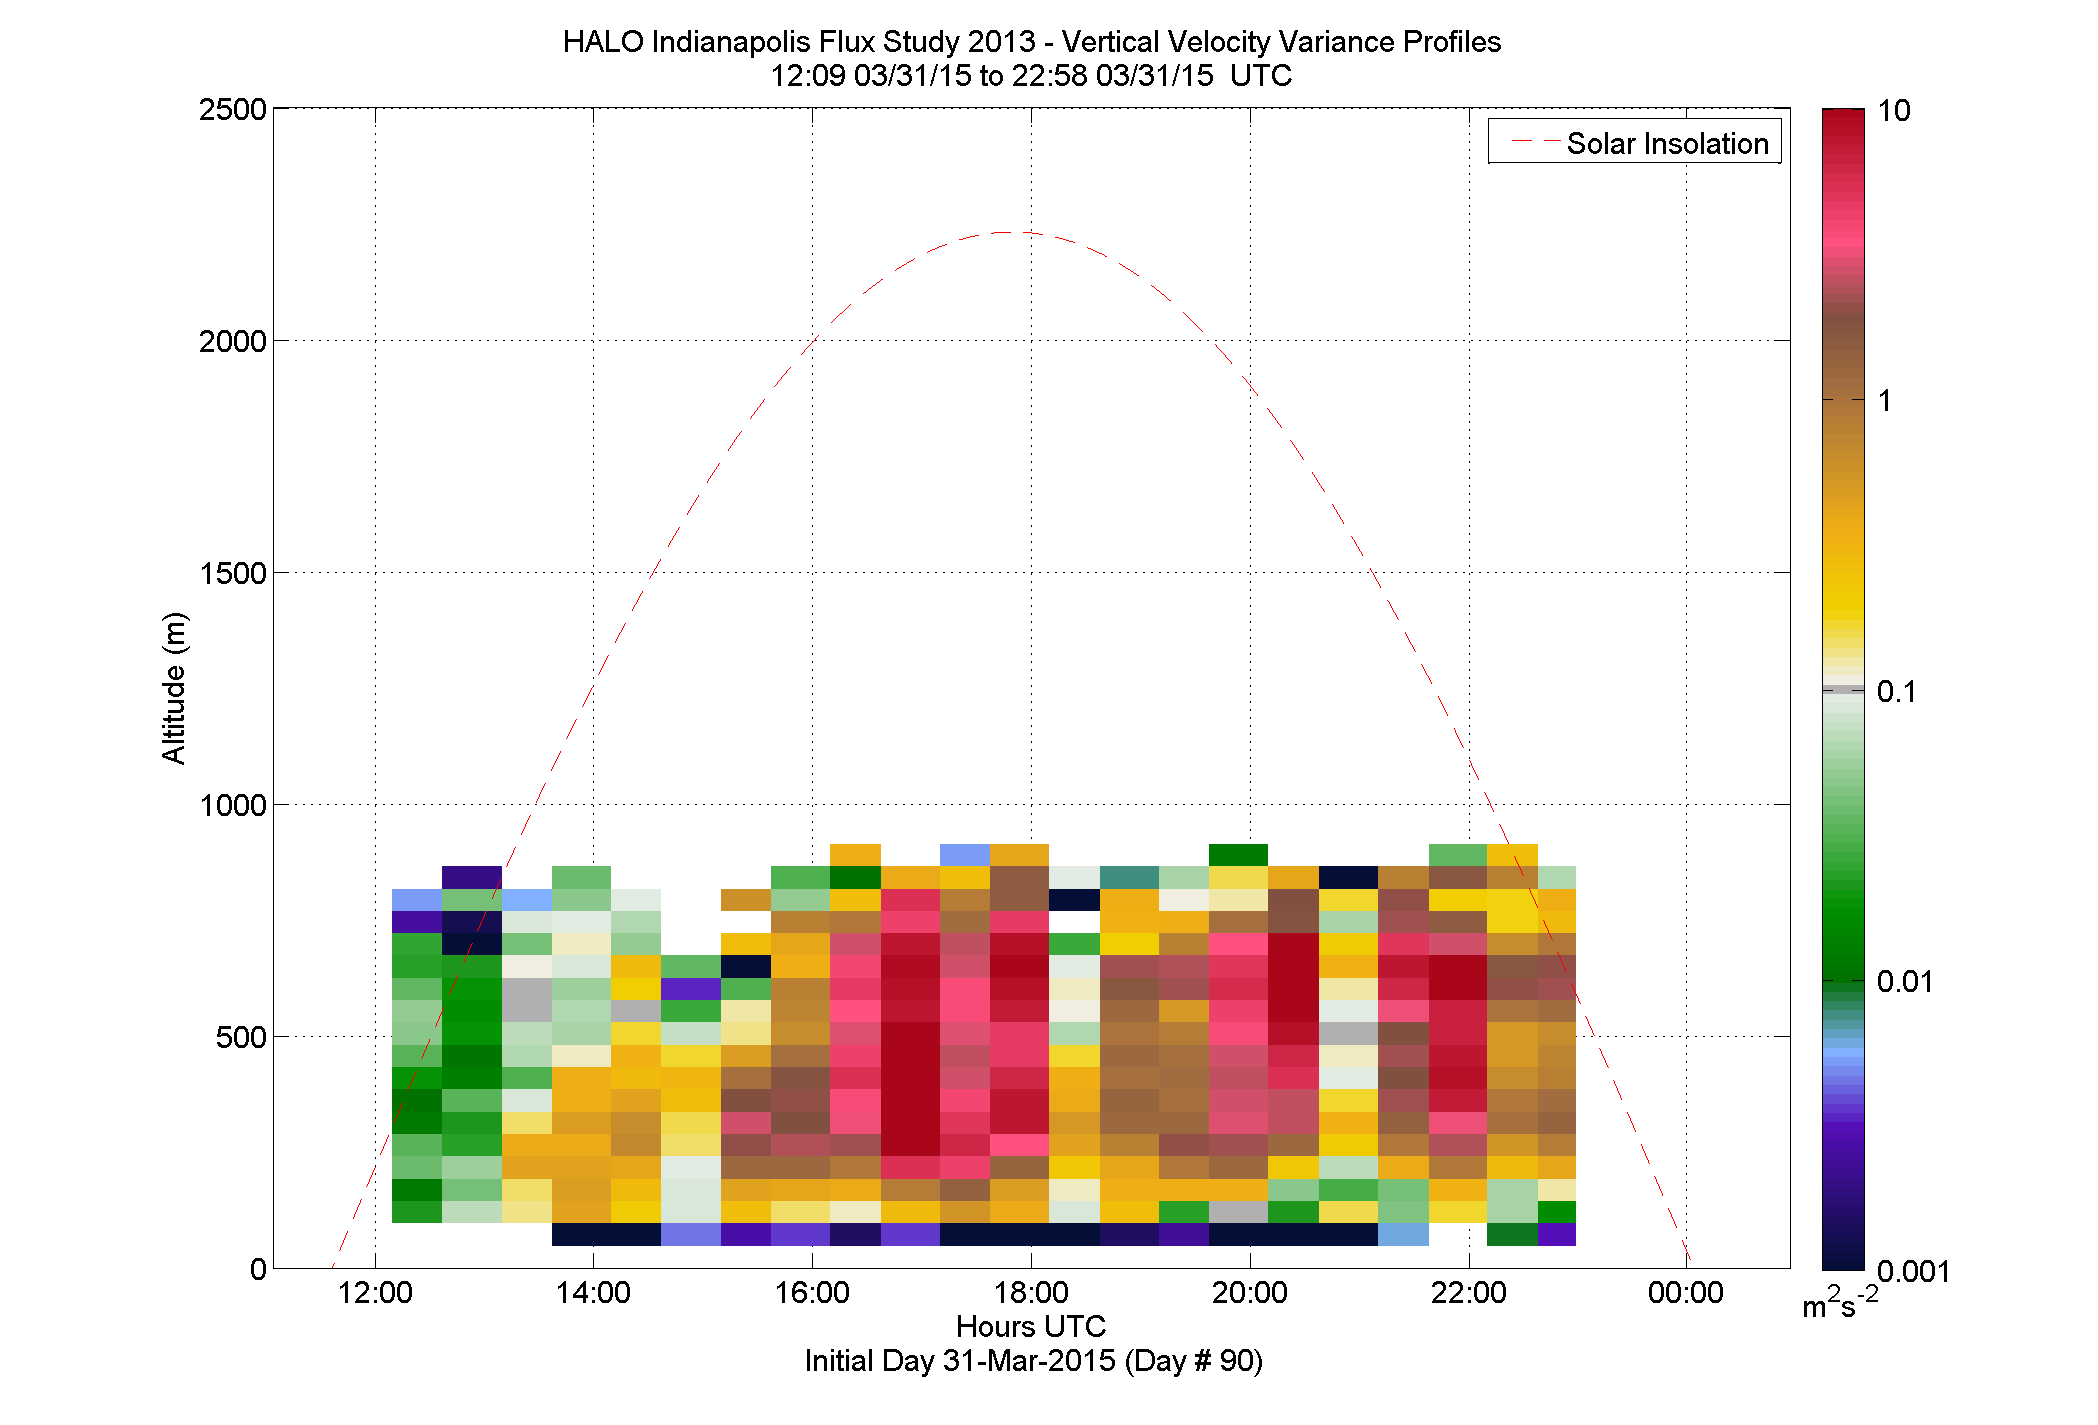 HALO vertical velocity variance profile - March 31 pm